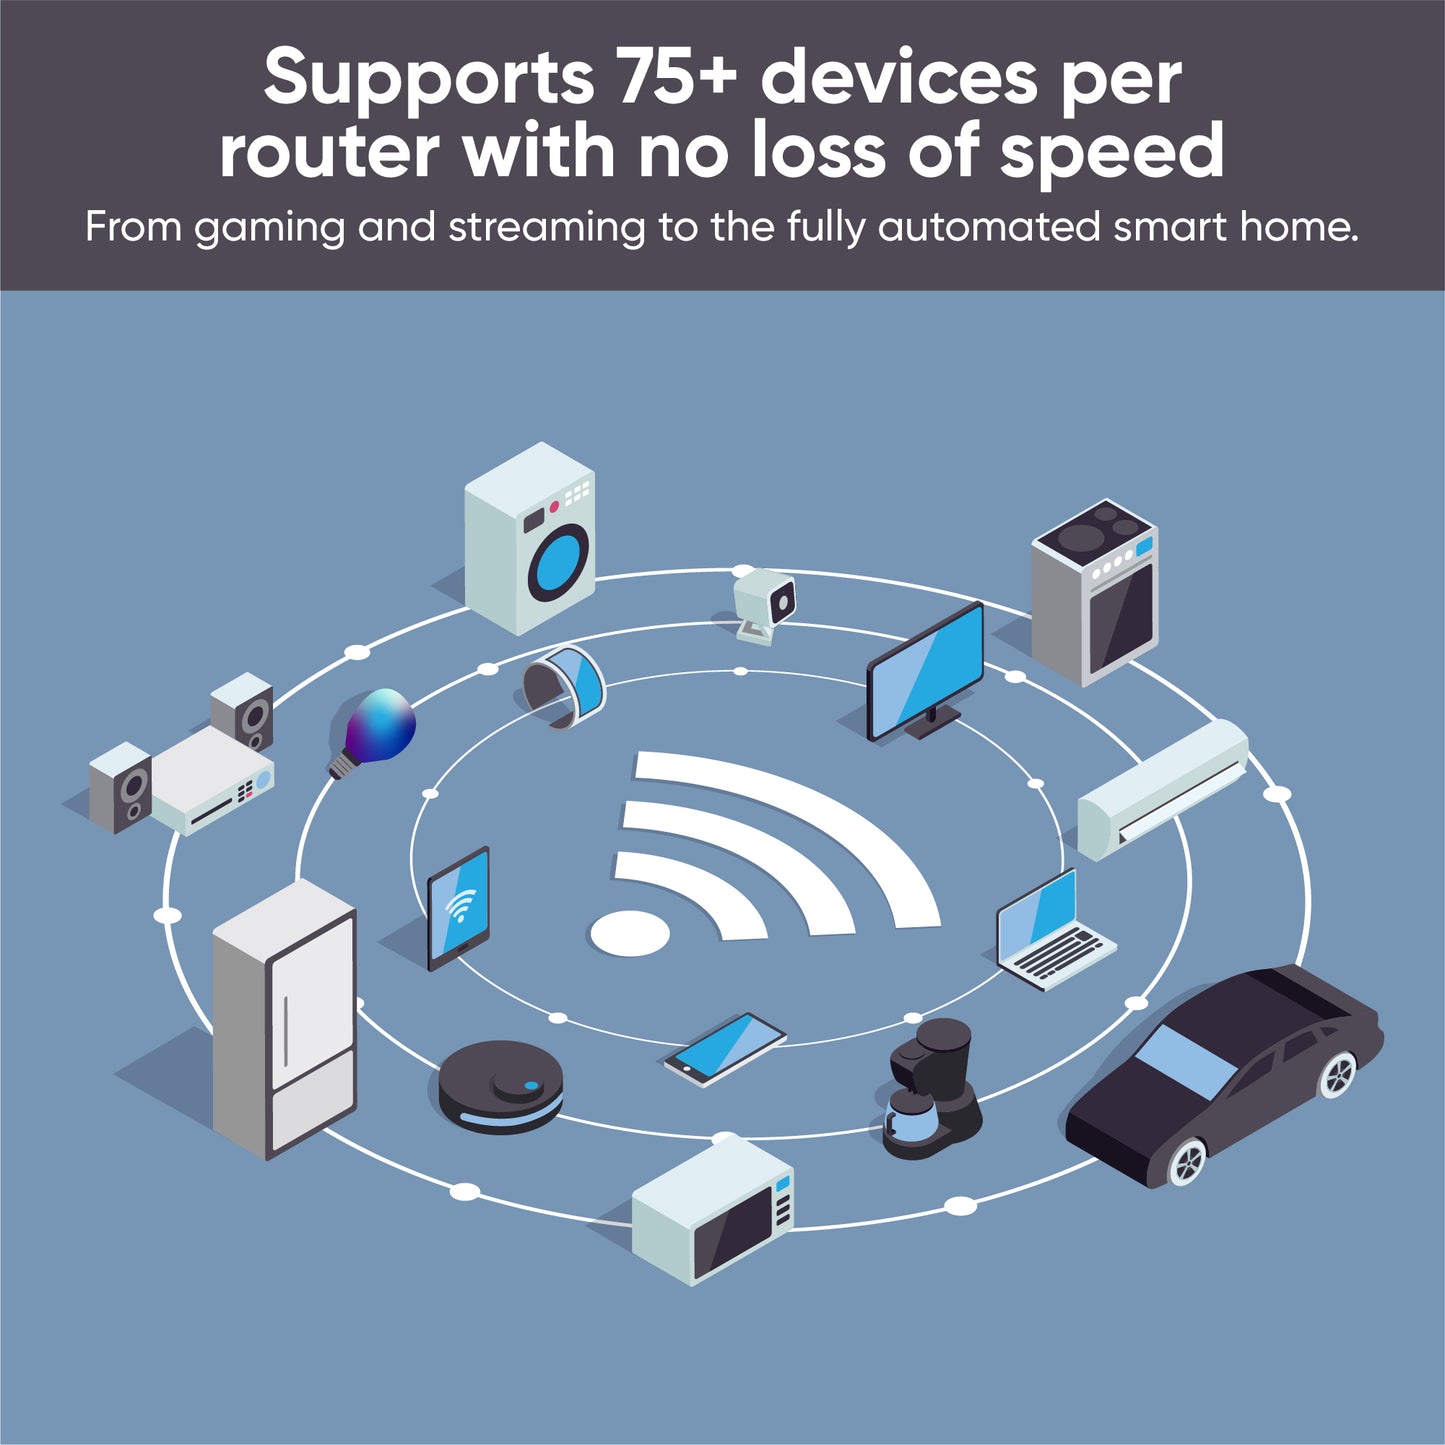 Mesh Router Pro can service 75+ devices at the same time.